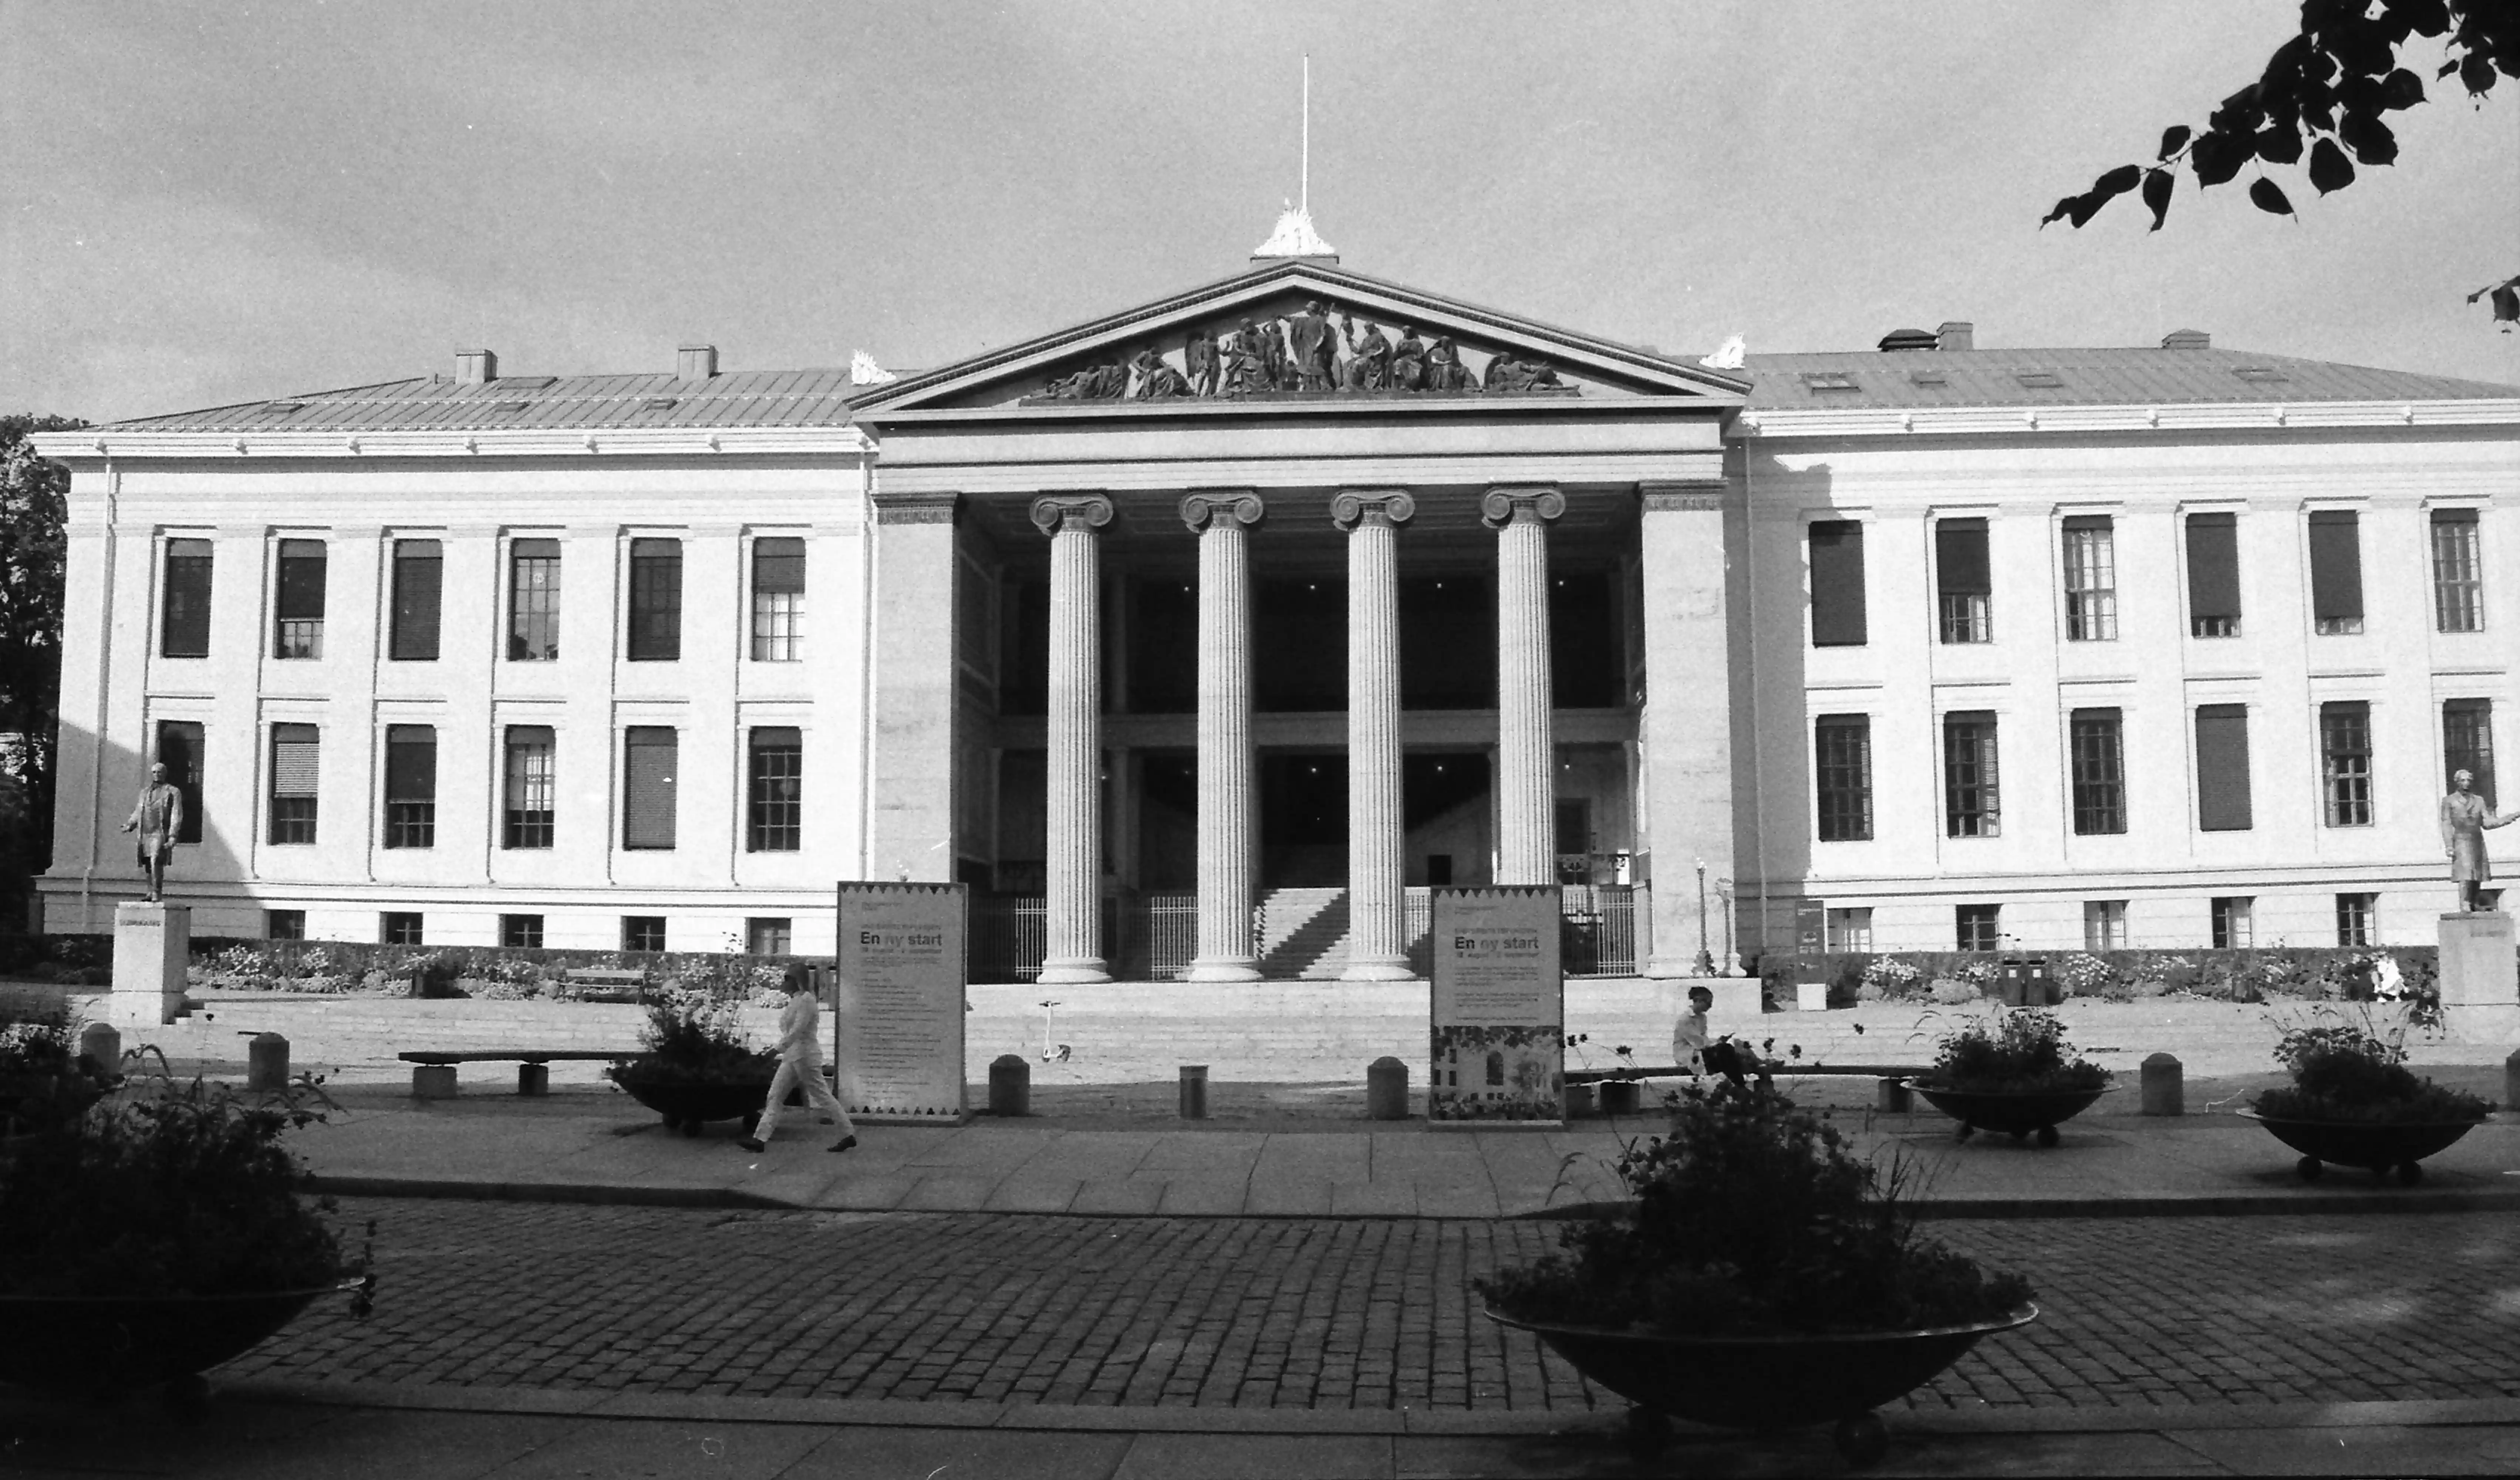 Black and white picture of a bulding with large columns